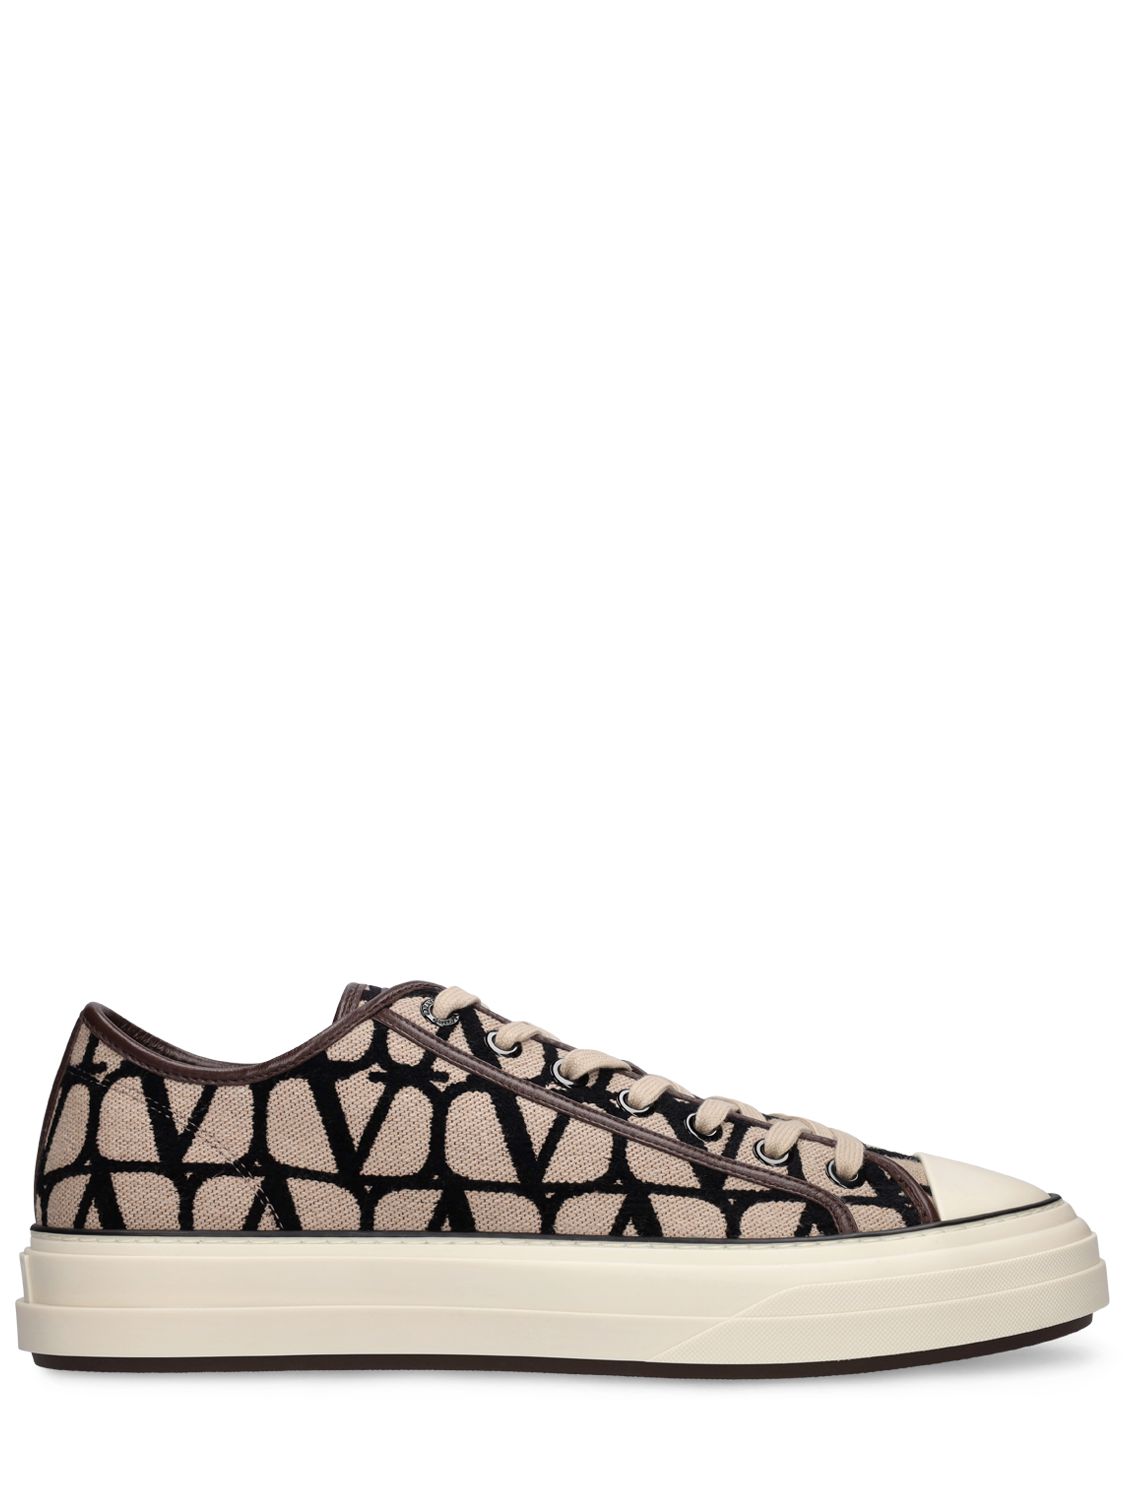 Image of Toile Iconographe Canvas Sneakers